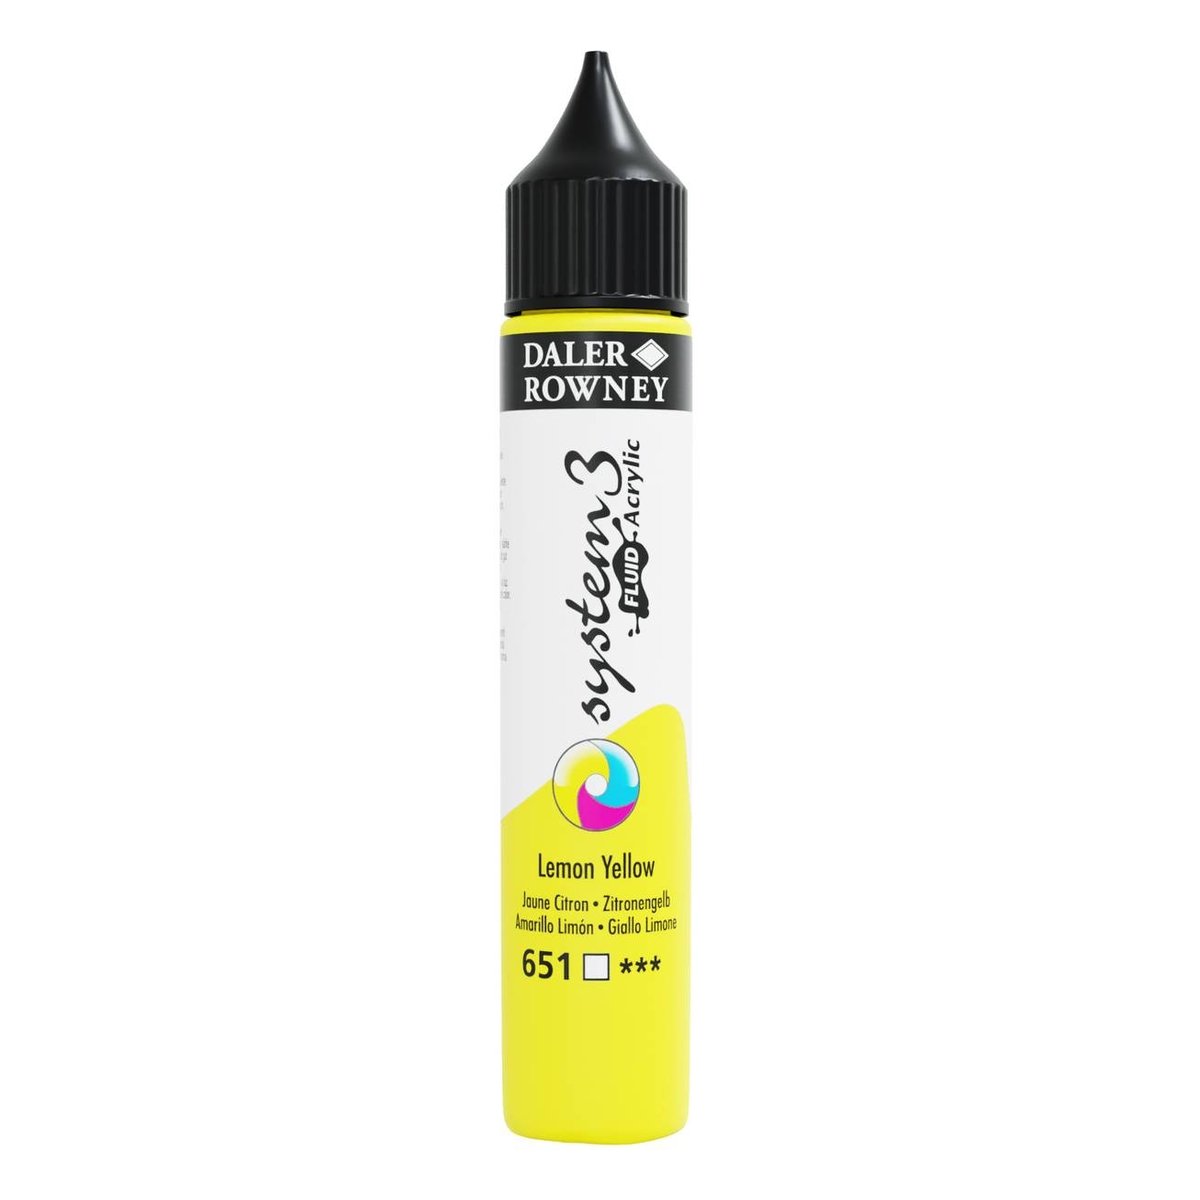 Daler-Rowney System 3 Pouring Silicone Oil, 29.5ml Bottle